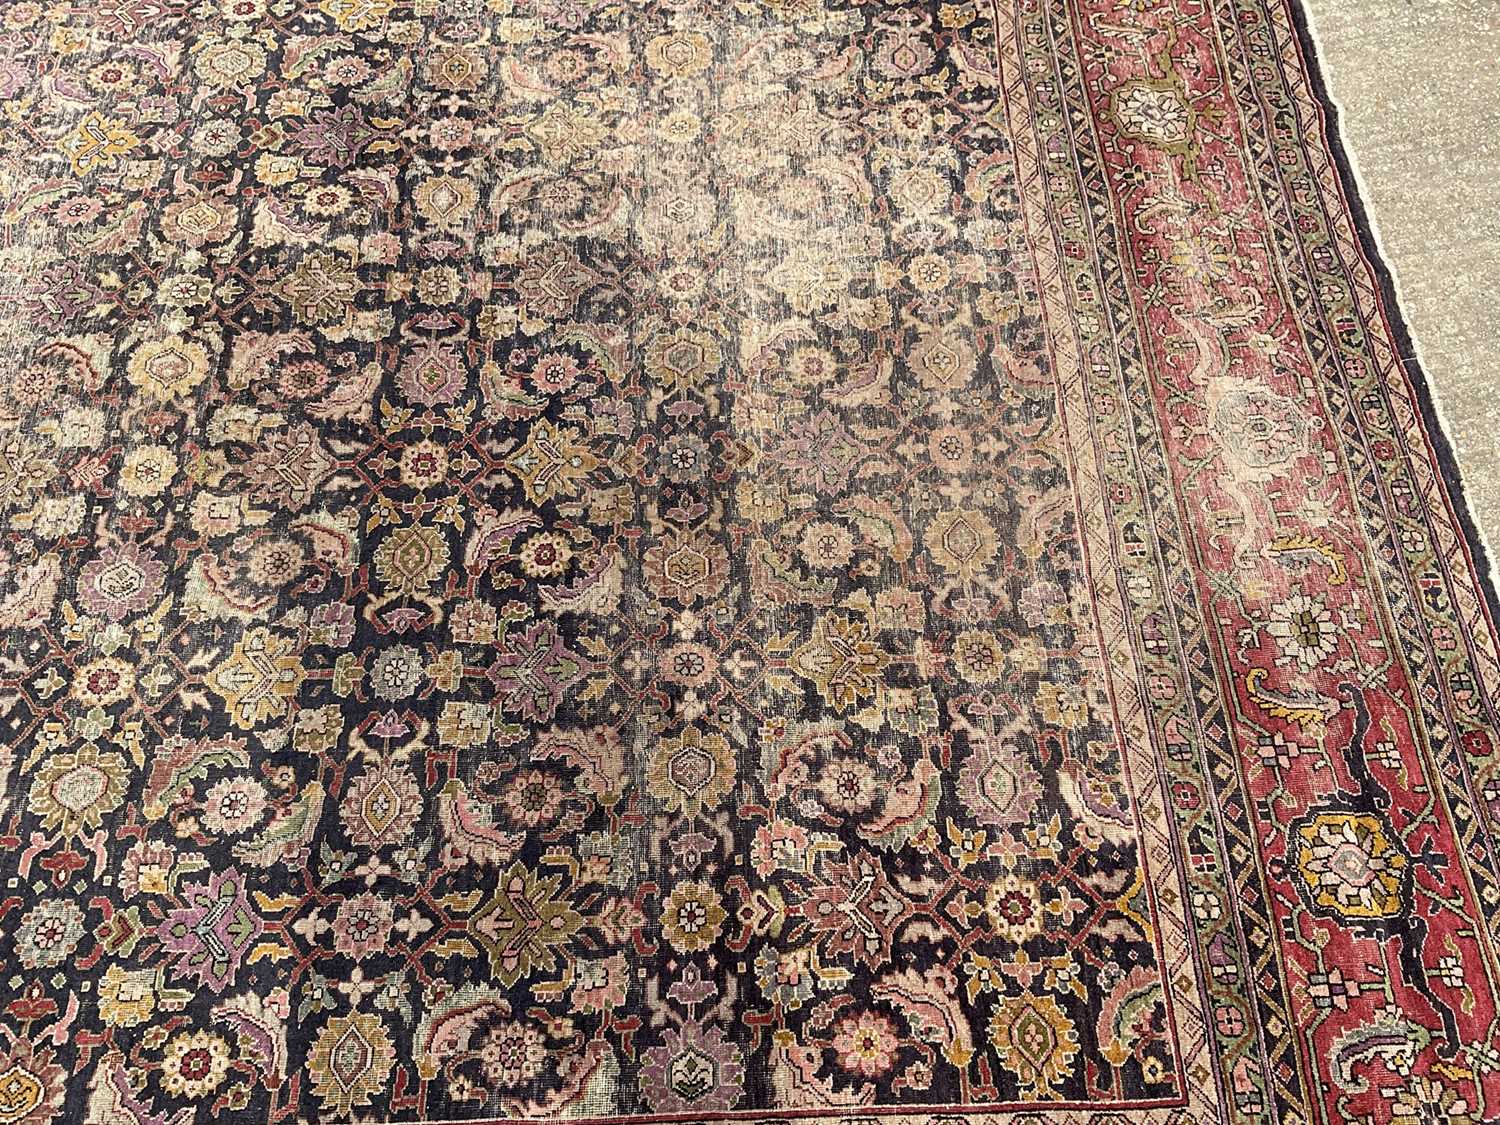 Good early Persian Bijar carpet, with allover floral knotwork on midnight blue ground, 400 x 300cm - Image 5 of 21